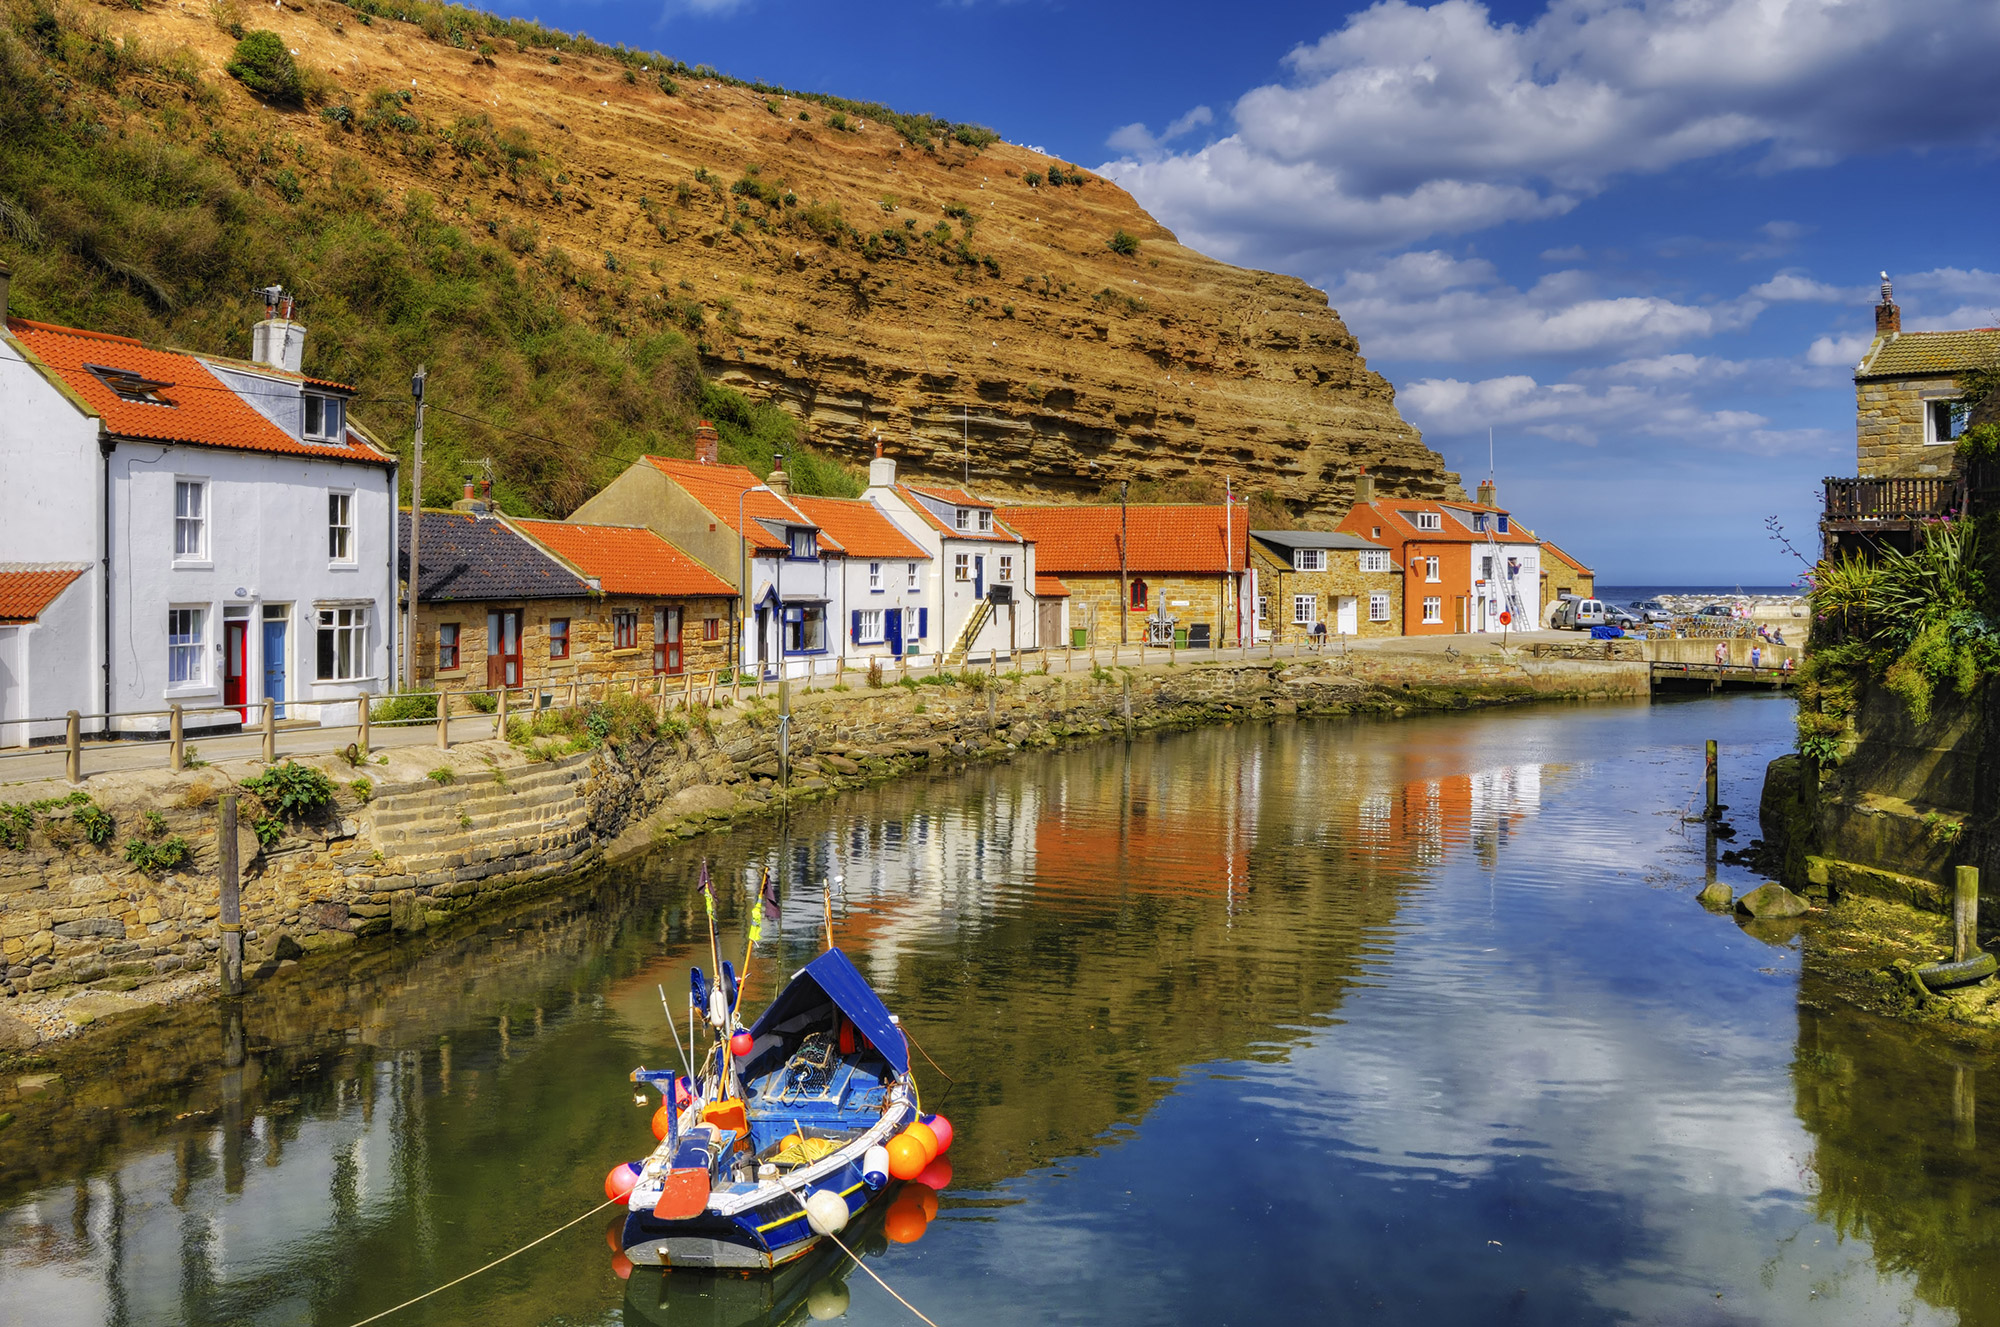 Relax with us in beautiful Staithes...